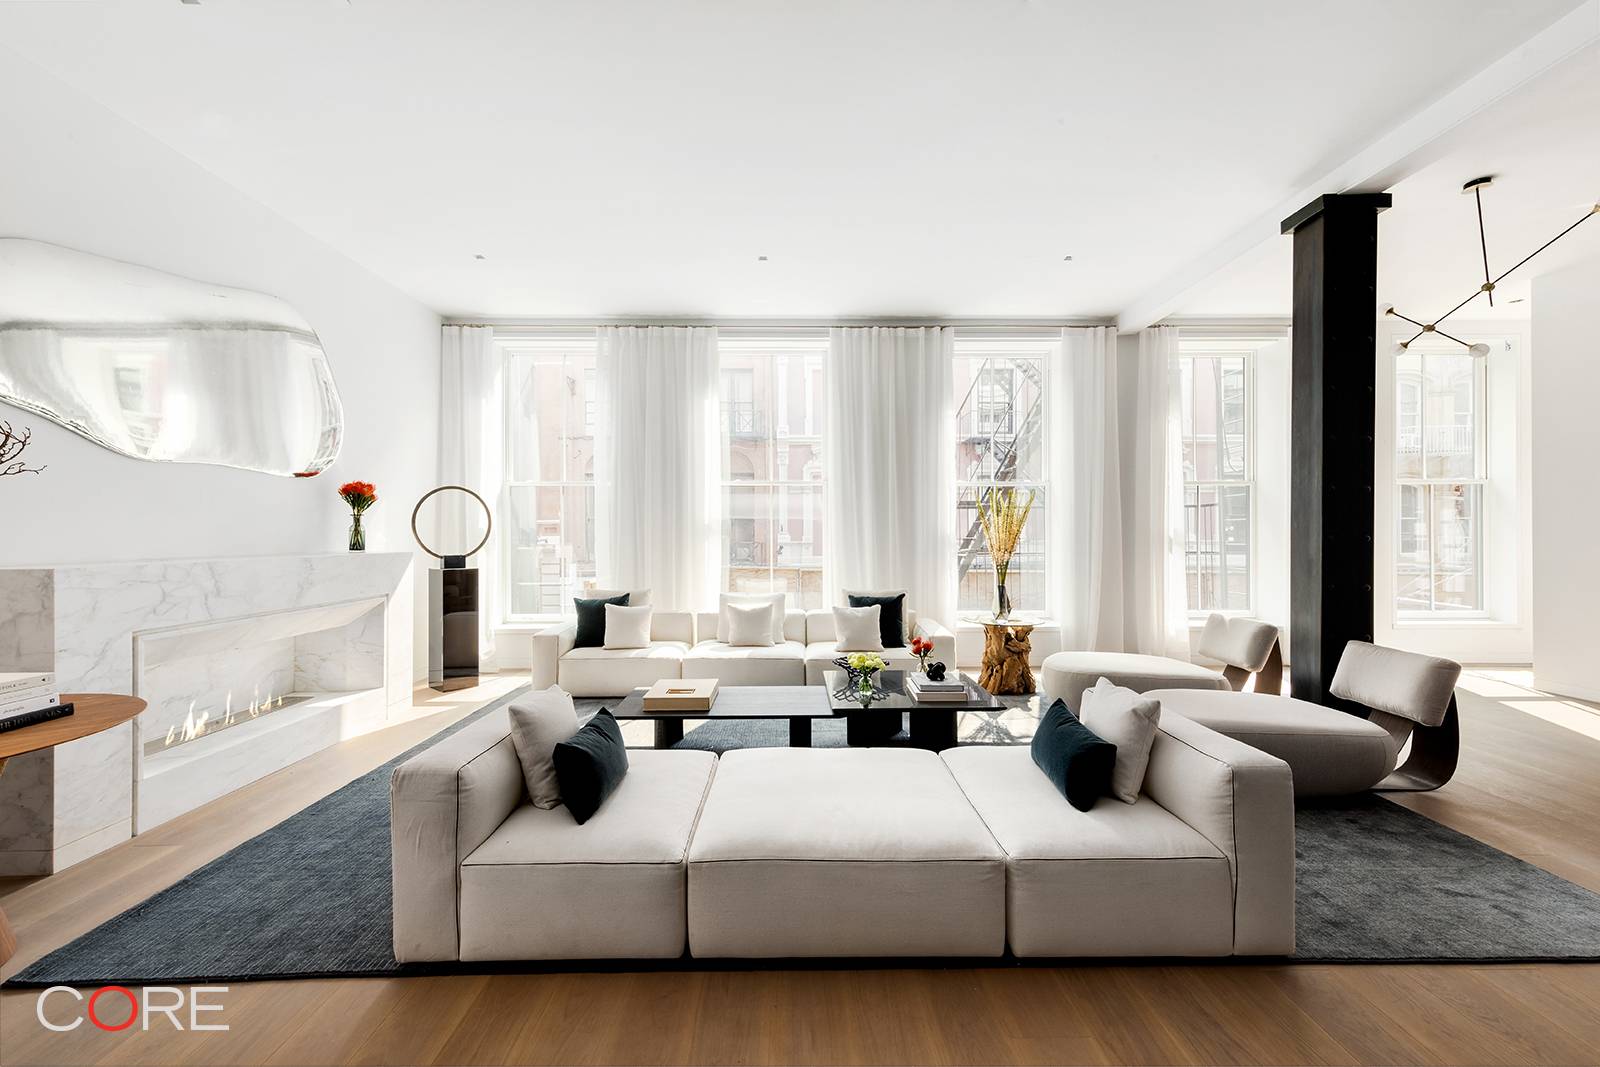 Nearly 50 feet wide, 49 Greene presents three full floor residences and one triplex penthouse in the heart of SoHo's Cast Iron Historic District.